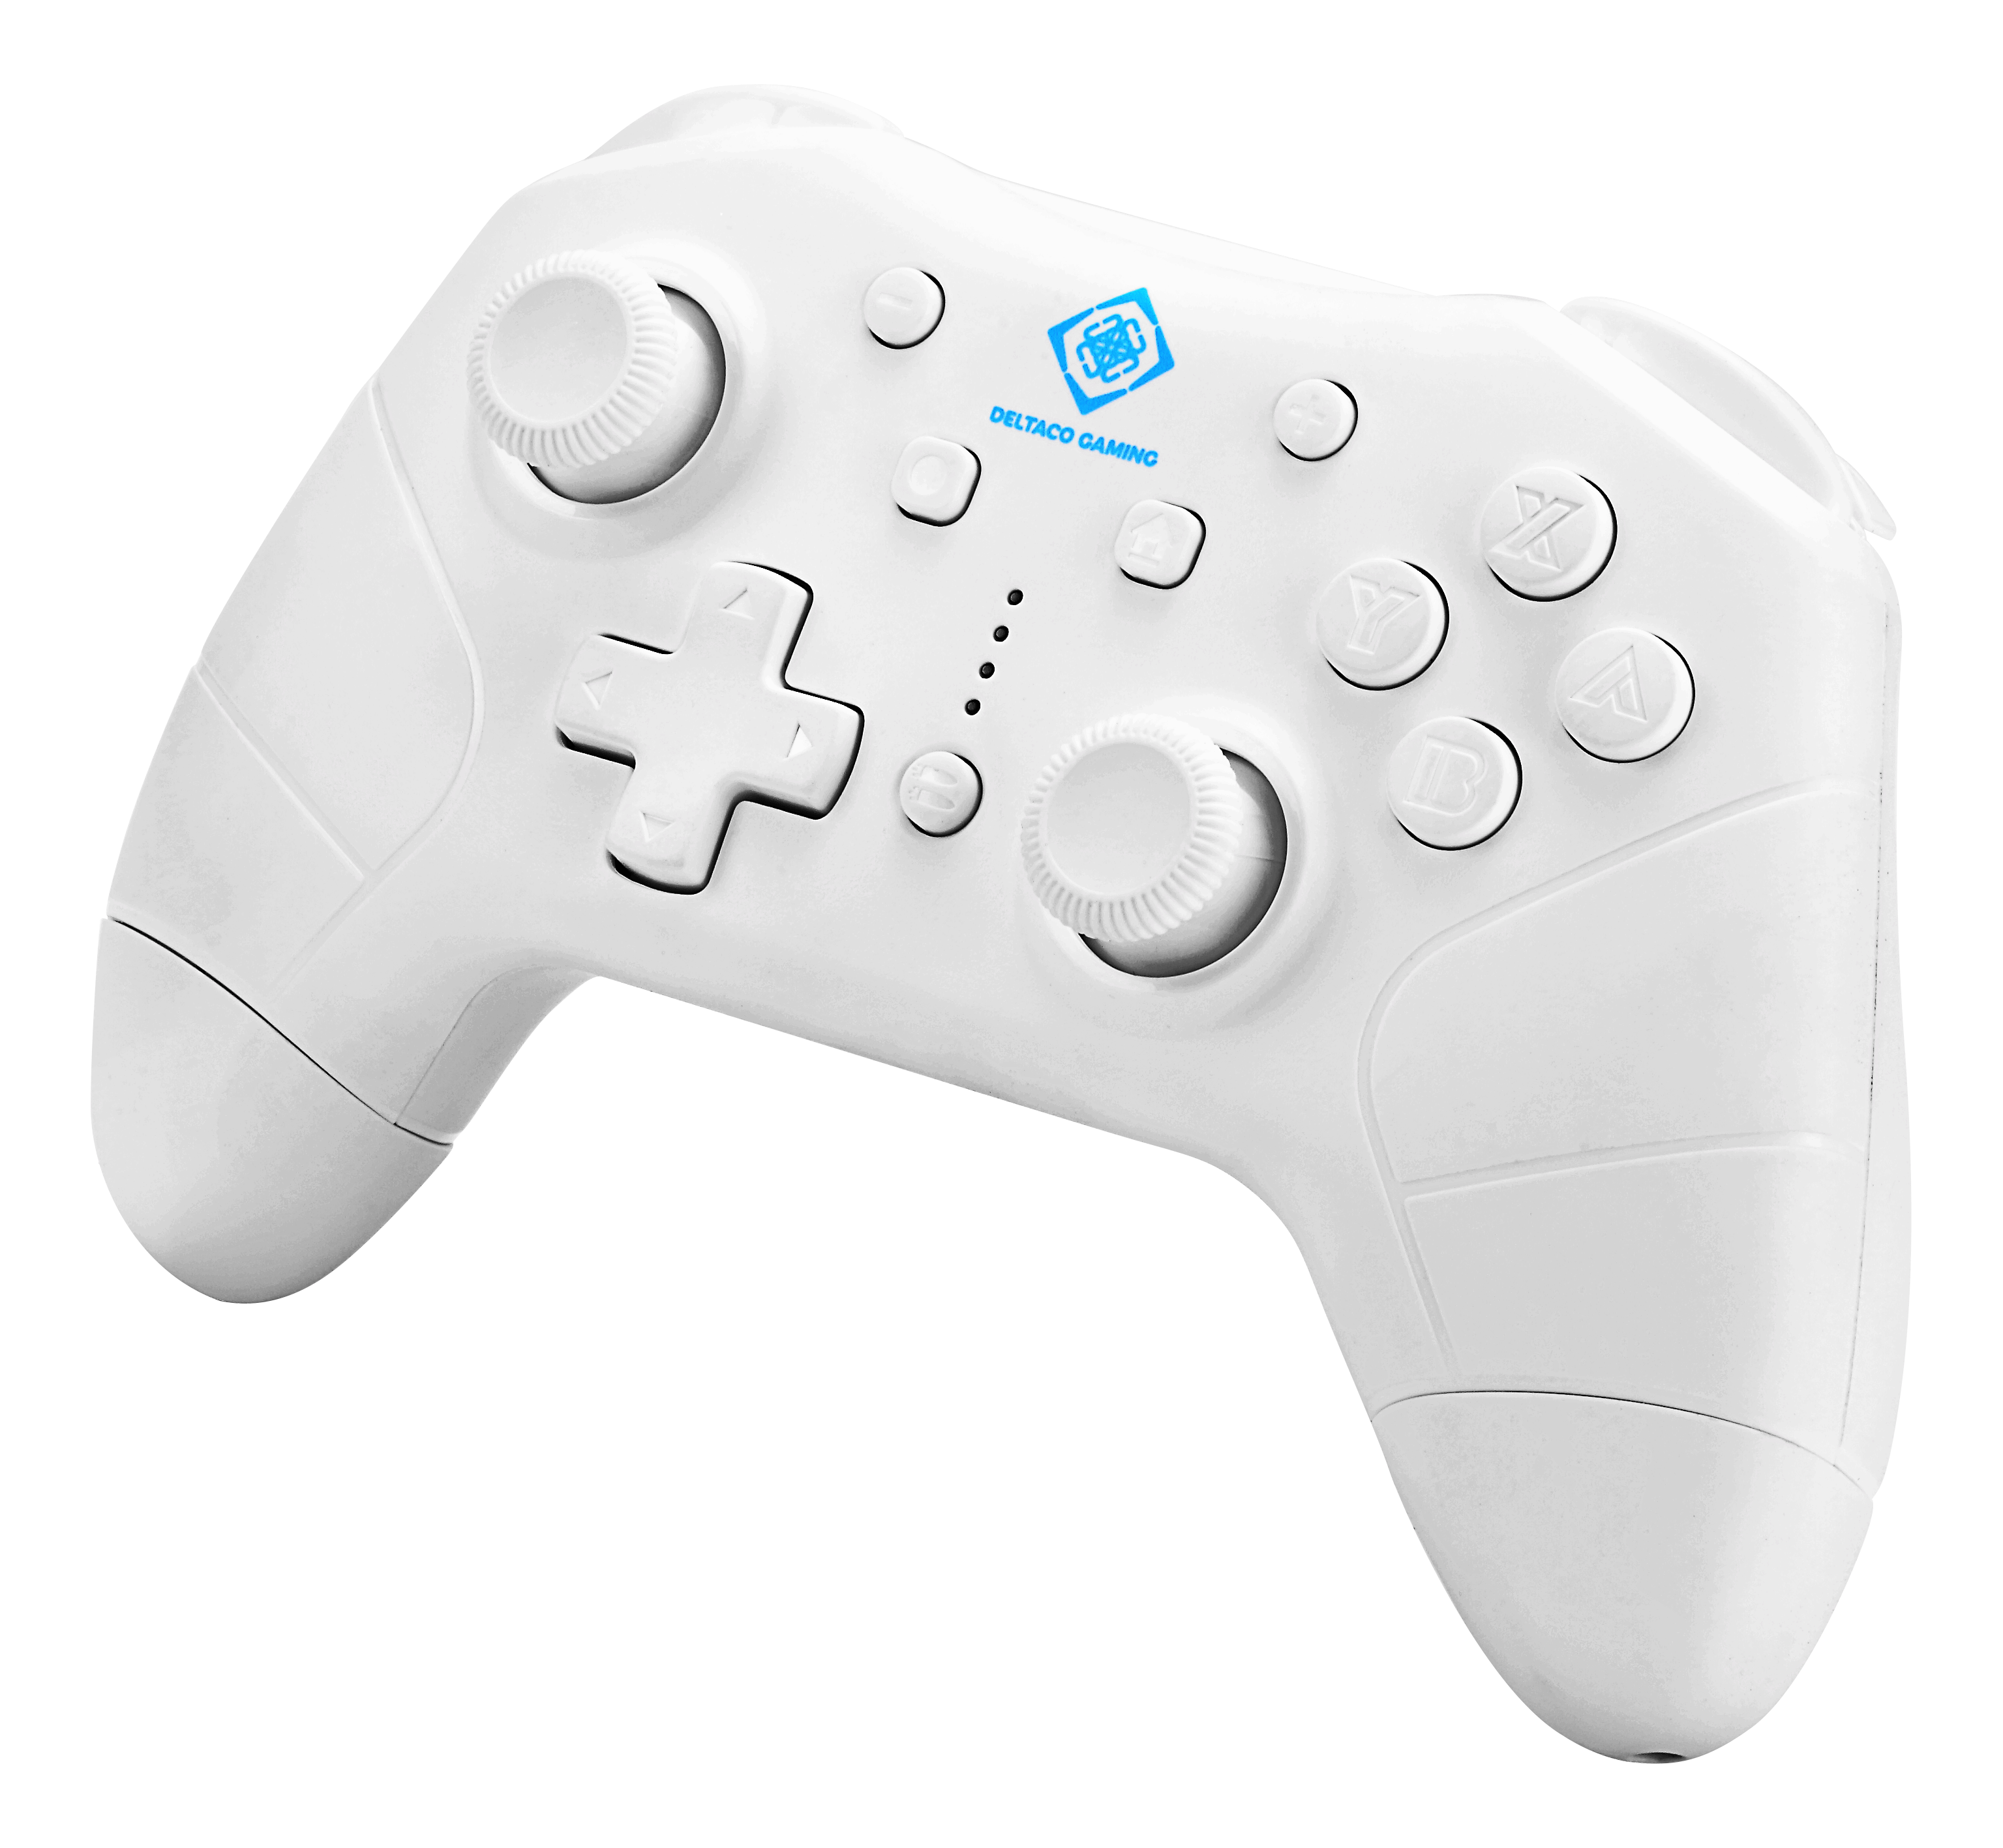 Controller DELTACO GAMING for Nintendo Switch / PC / Android, Bluetooth 2.1, ABS plastic, white / GAM-103-W